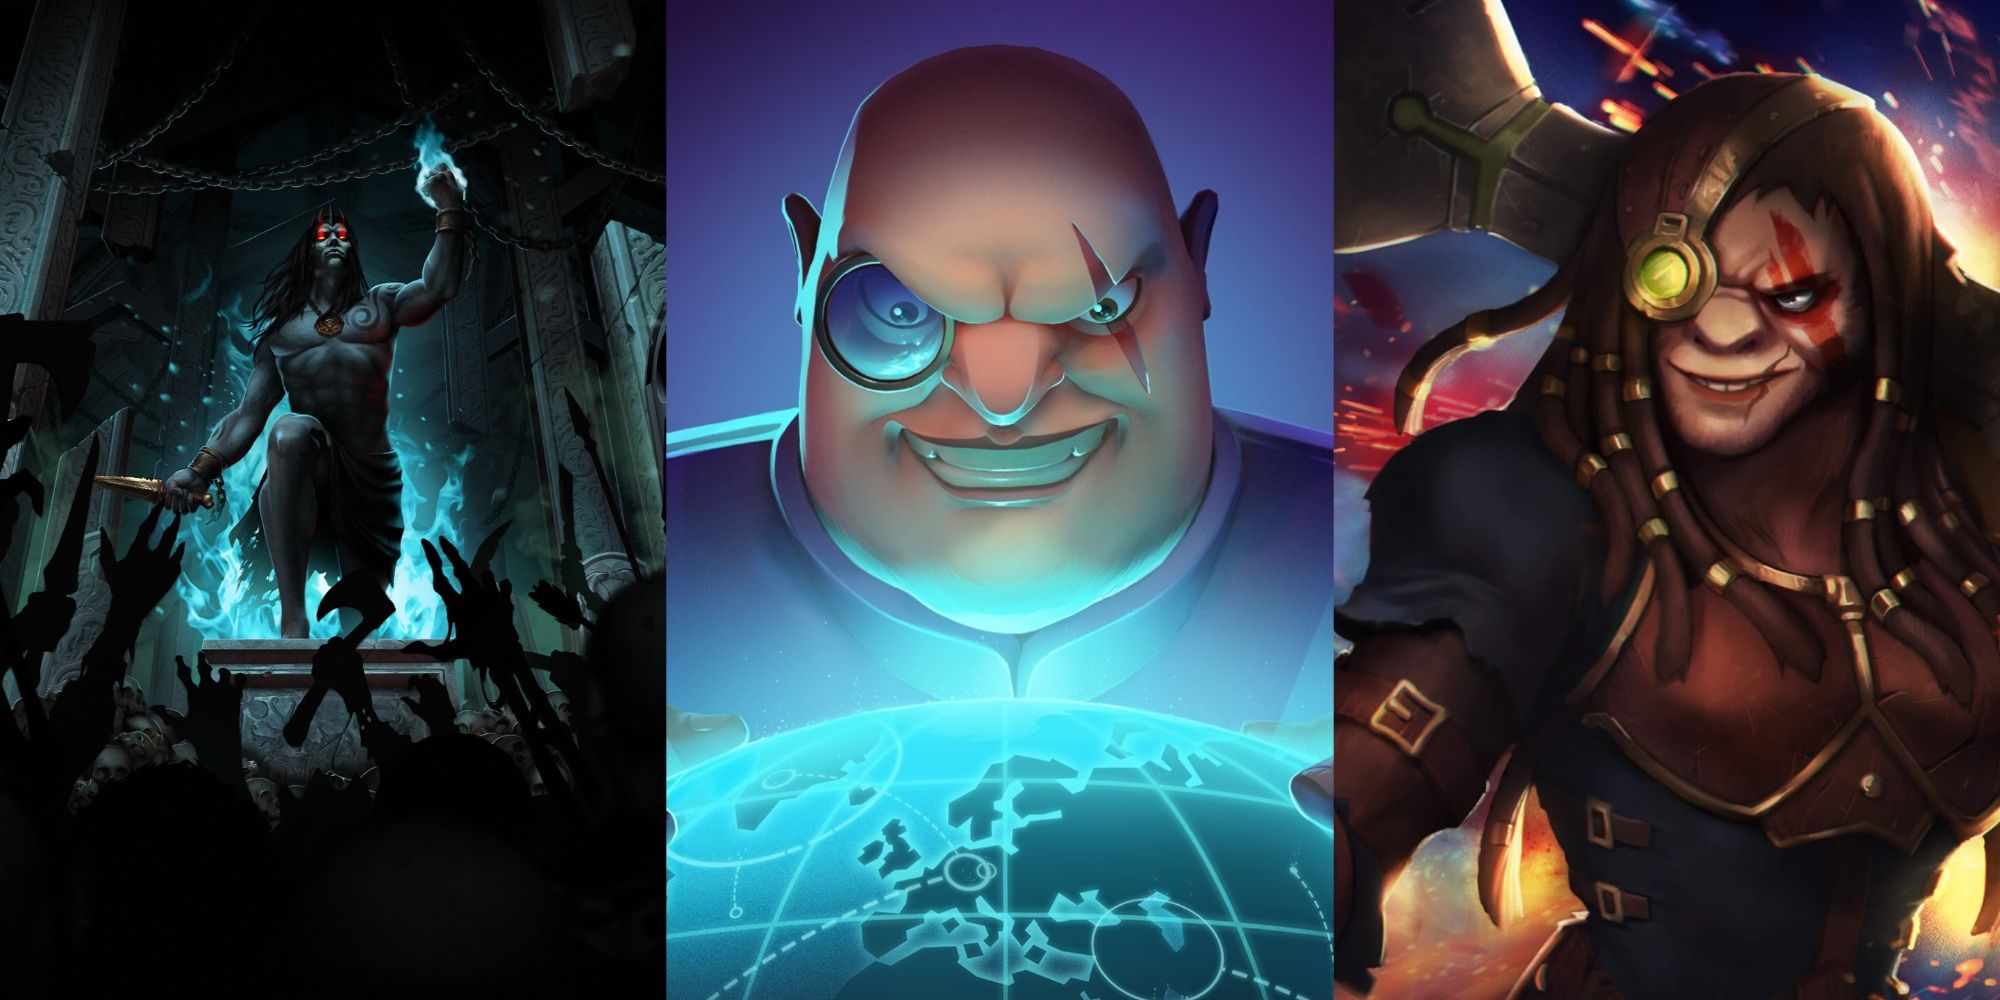 3 images, to the left a demon with hand outstretched covered in blue flames from Iratus, in the middle a bald man with a monocle and a scar over the eye with an evil grin over a globe from Evil Genius 2, to the right an animalistic man with dreadlocks holding a strange weapon over the shoulder from Legend of Keepers